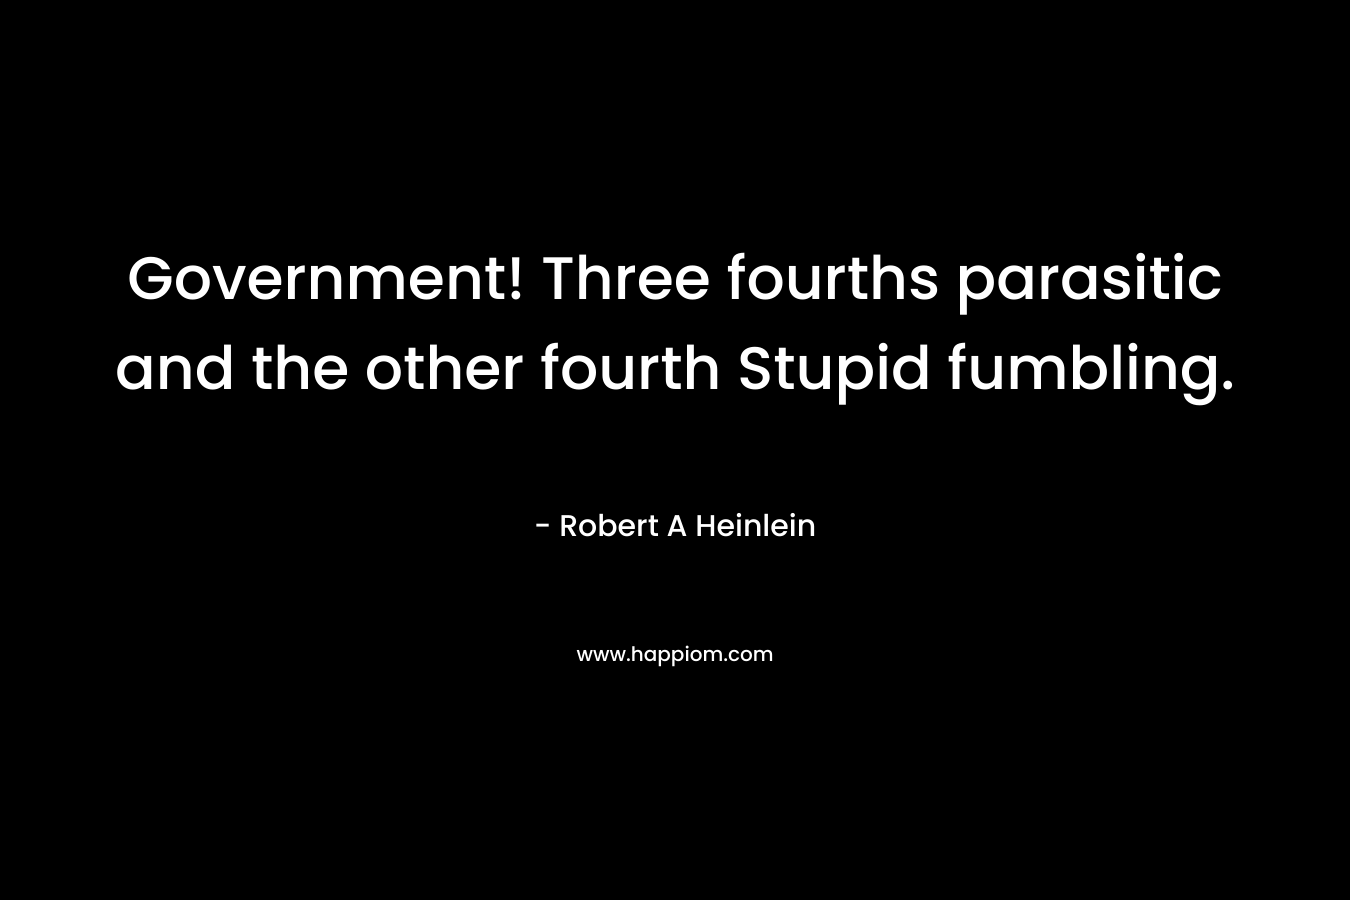 Government! Three fourths parasitic and the other fourth Stupid fumbling.